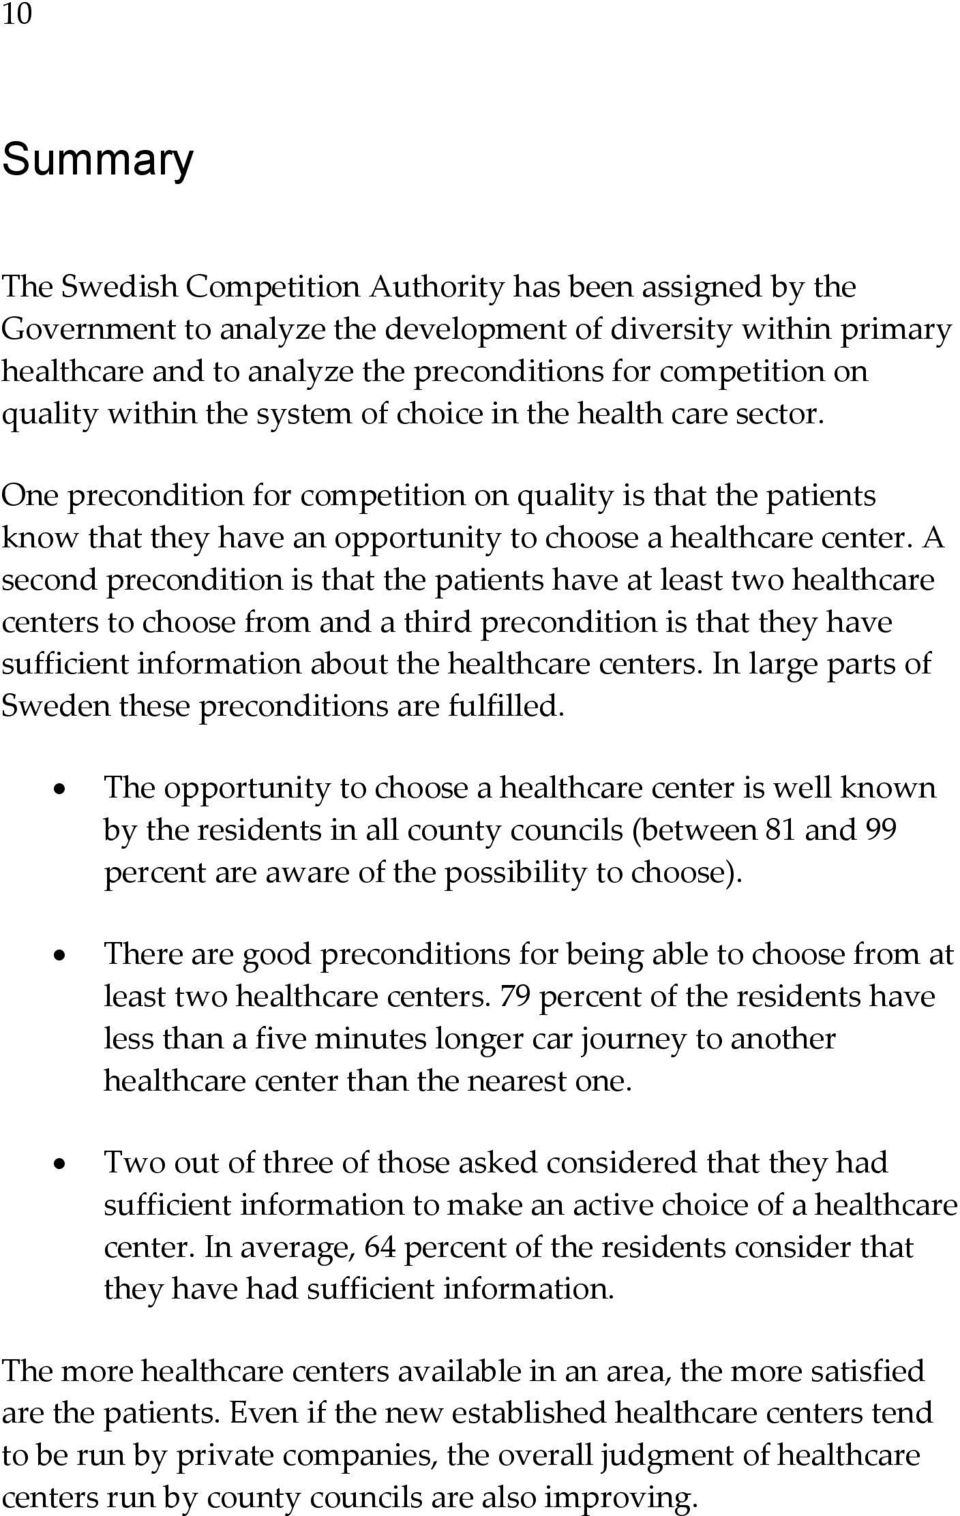 A second precondition is that the patients have at least two healthcare centers to choose from and a third precondition is that they have sufficient information about the healthcare centers.